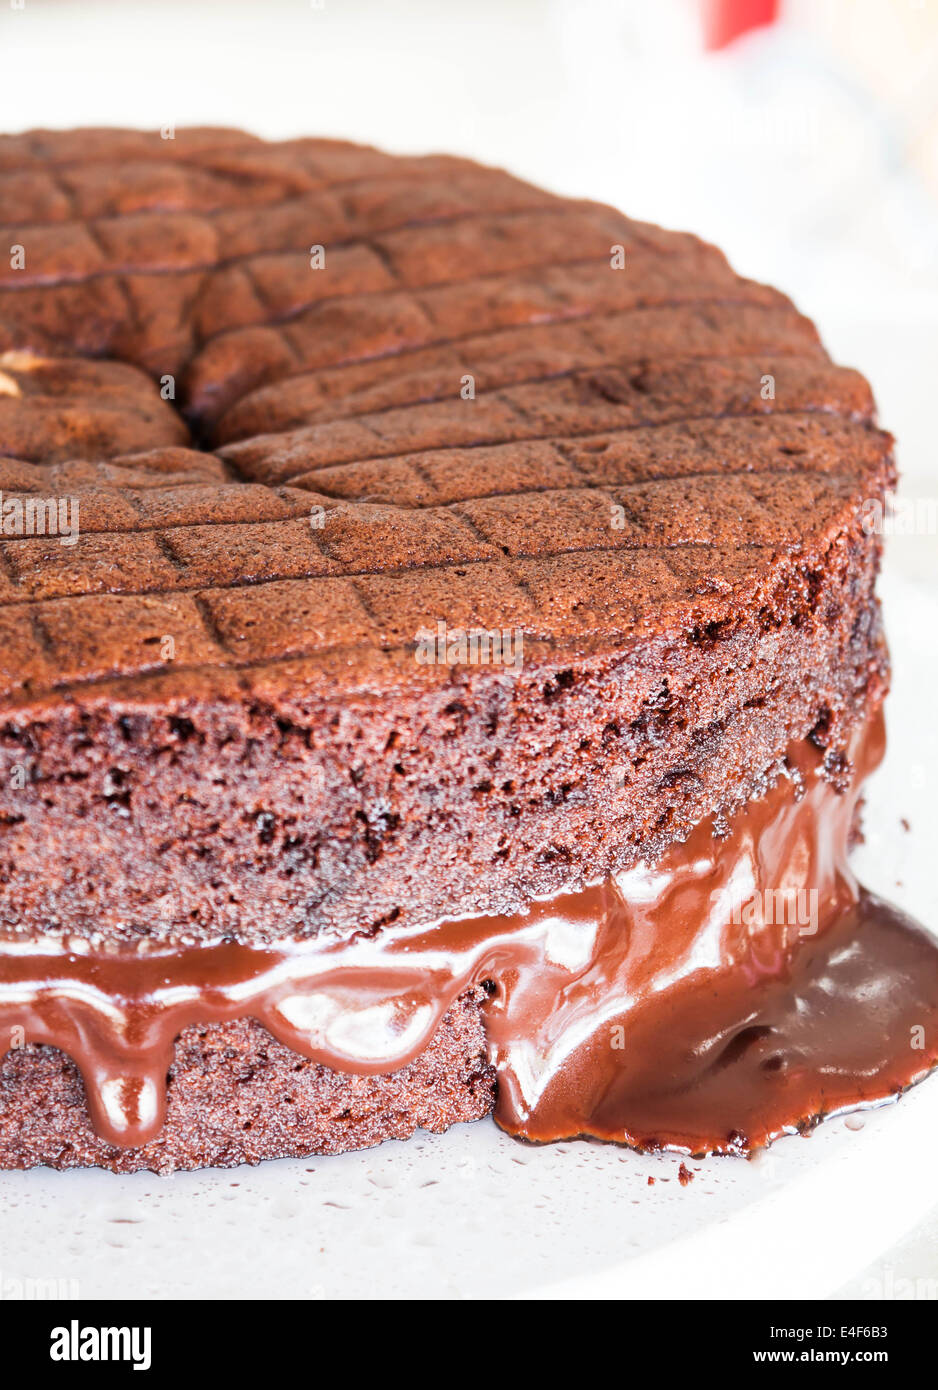 Chocolate fillings melt from middle layer of chocolate cake Stock Photo